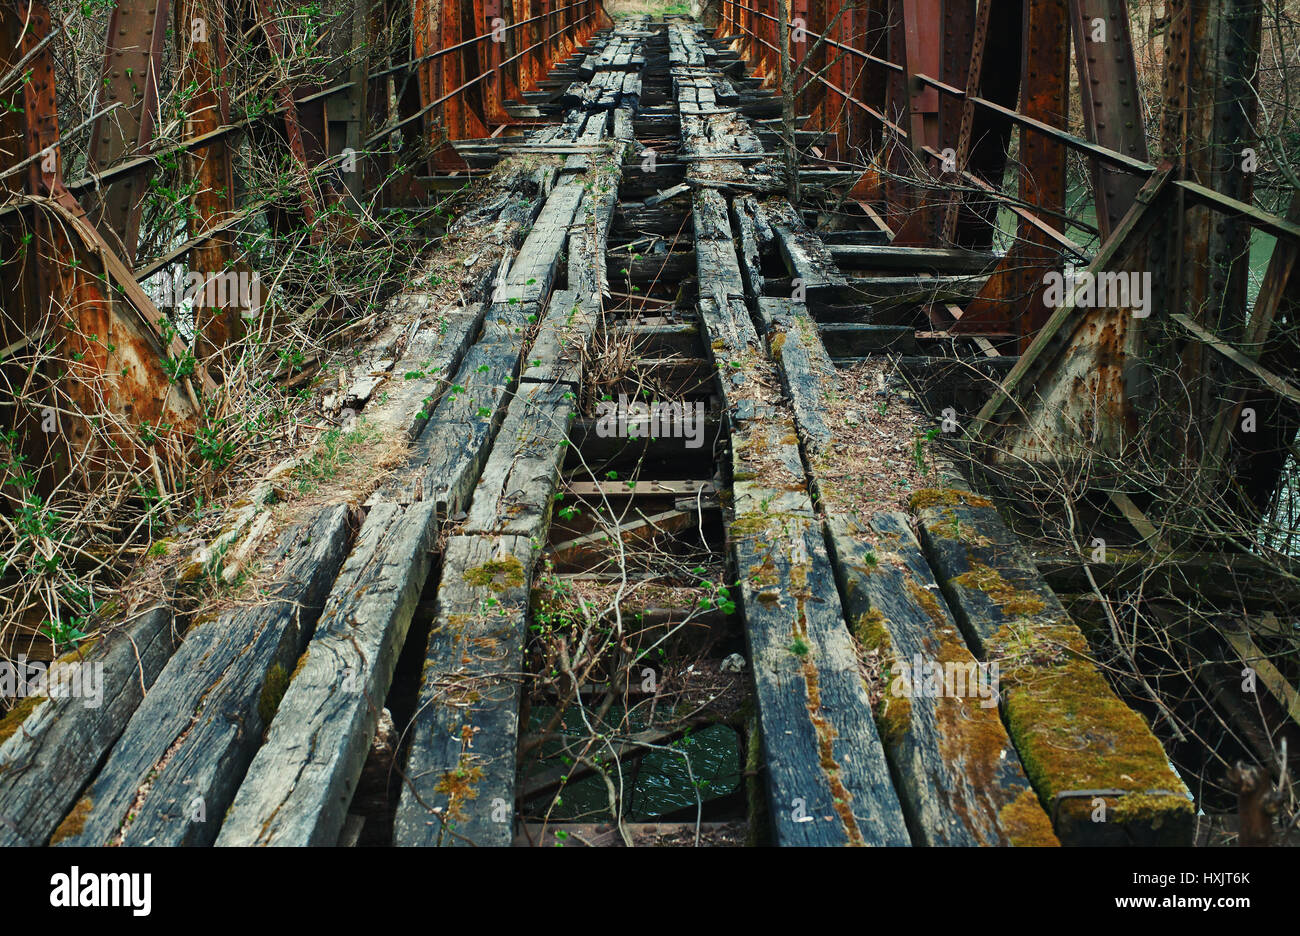 Details Of An Old Ruined Bridge Overgrown With Plants Stock Photo Alamy